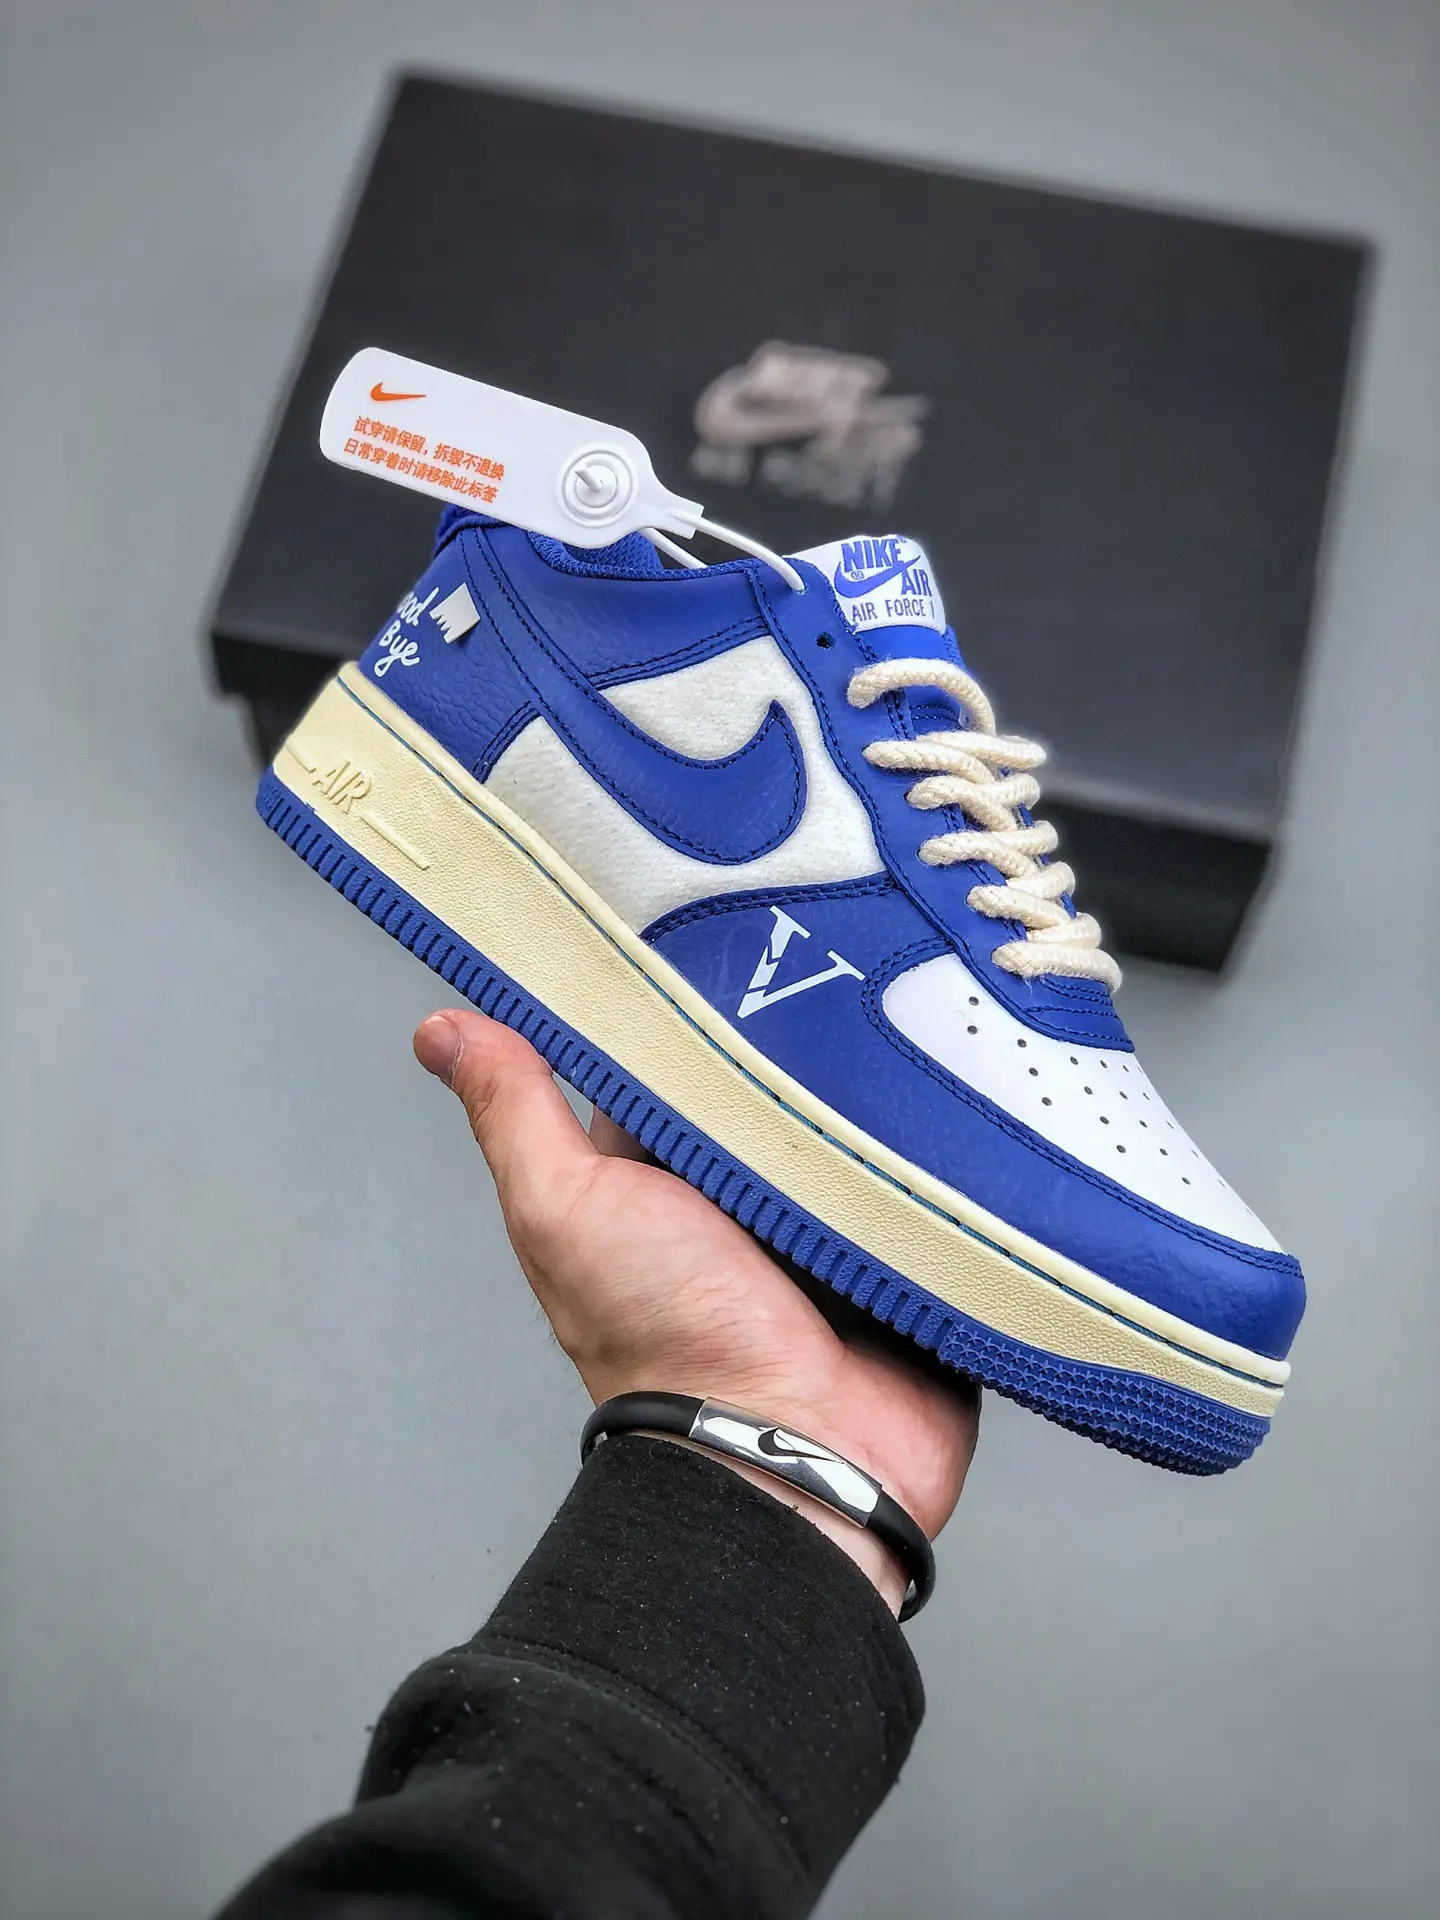 Nike Air Force 1 Low Blue Leather Sneakers Review | YtaYta